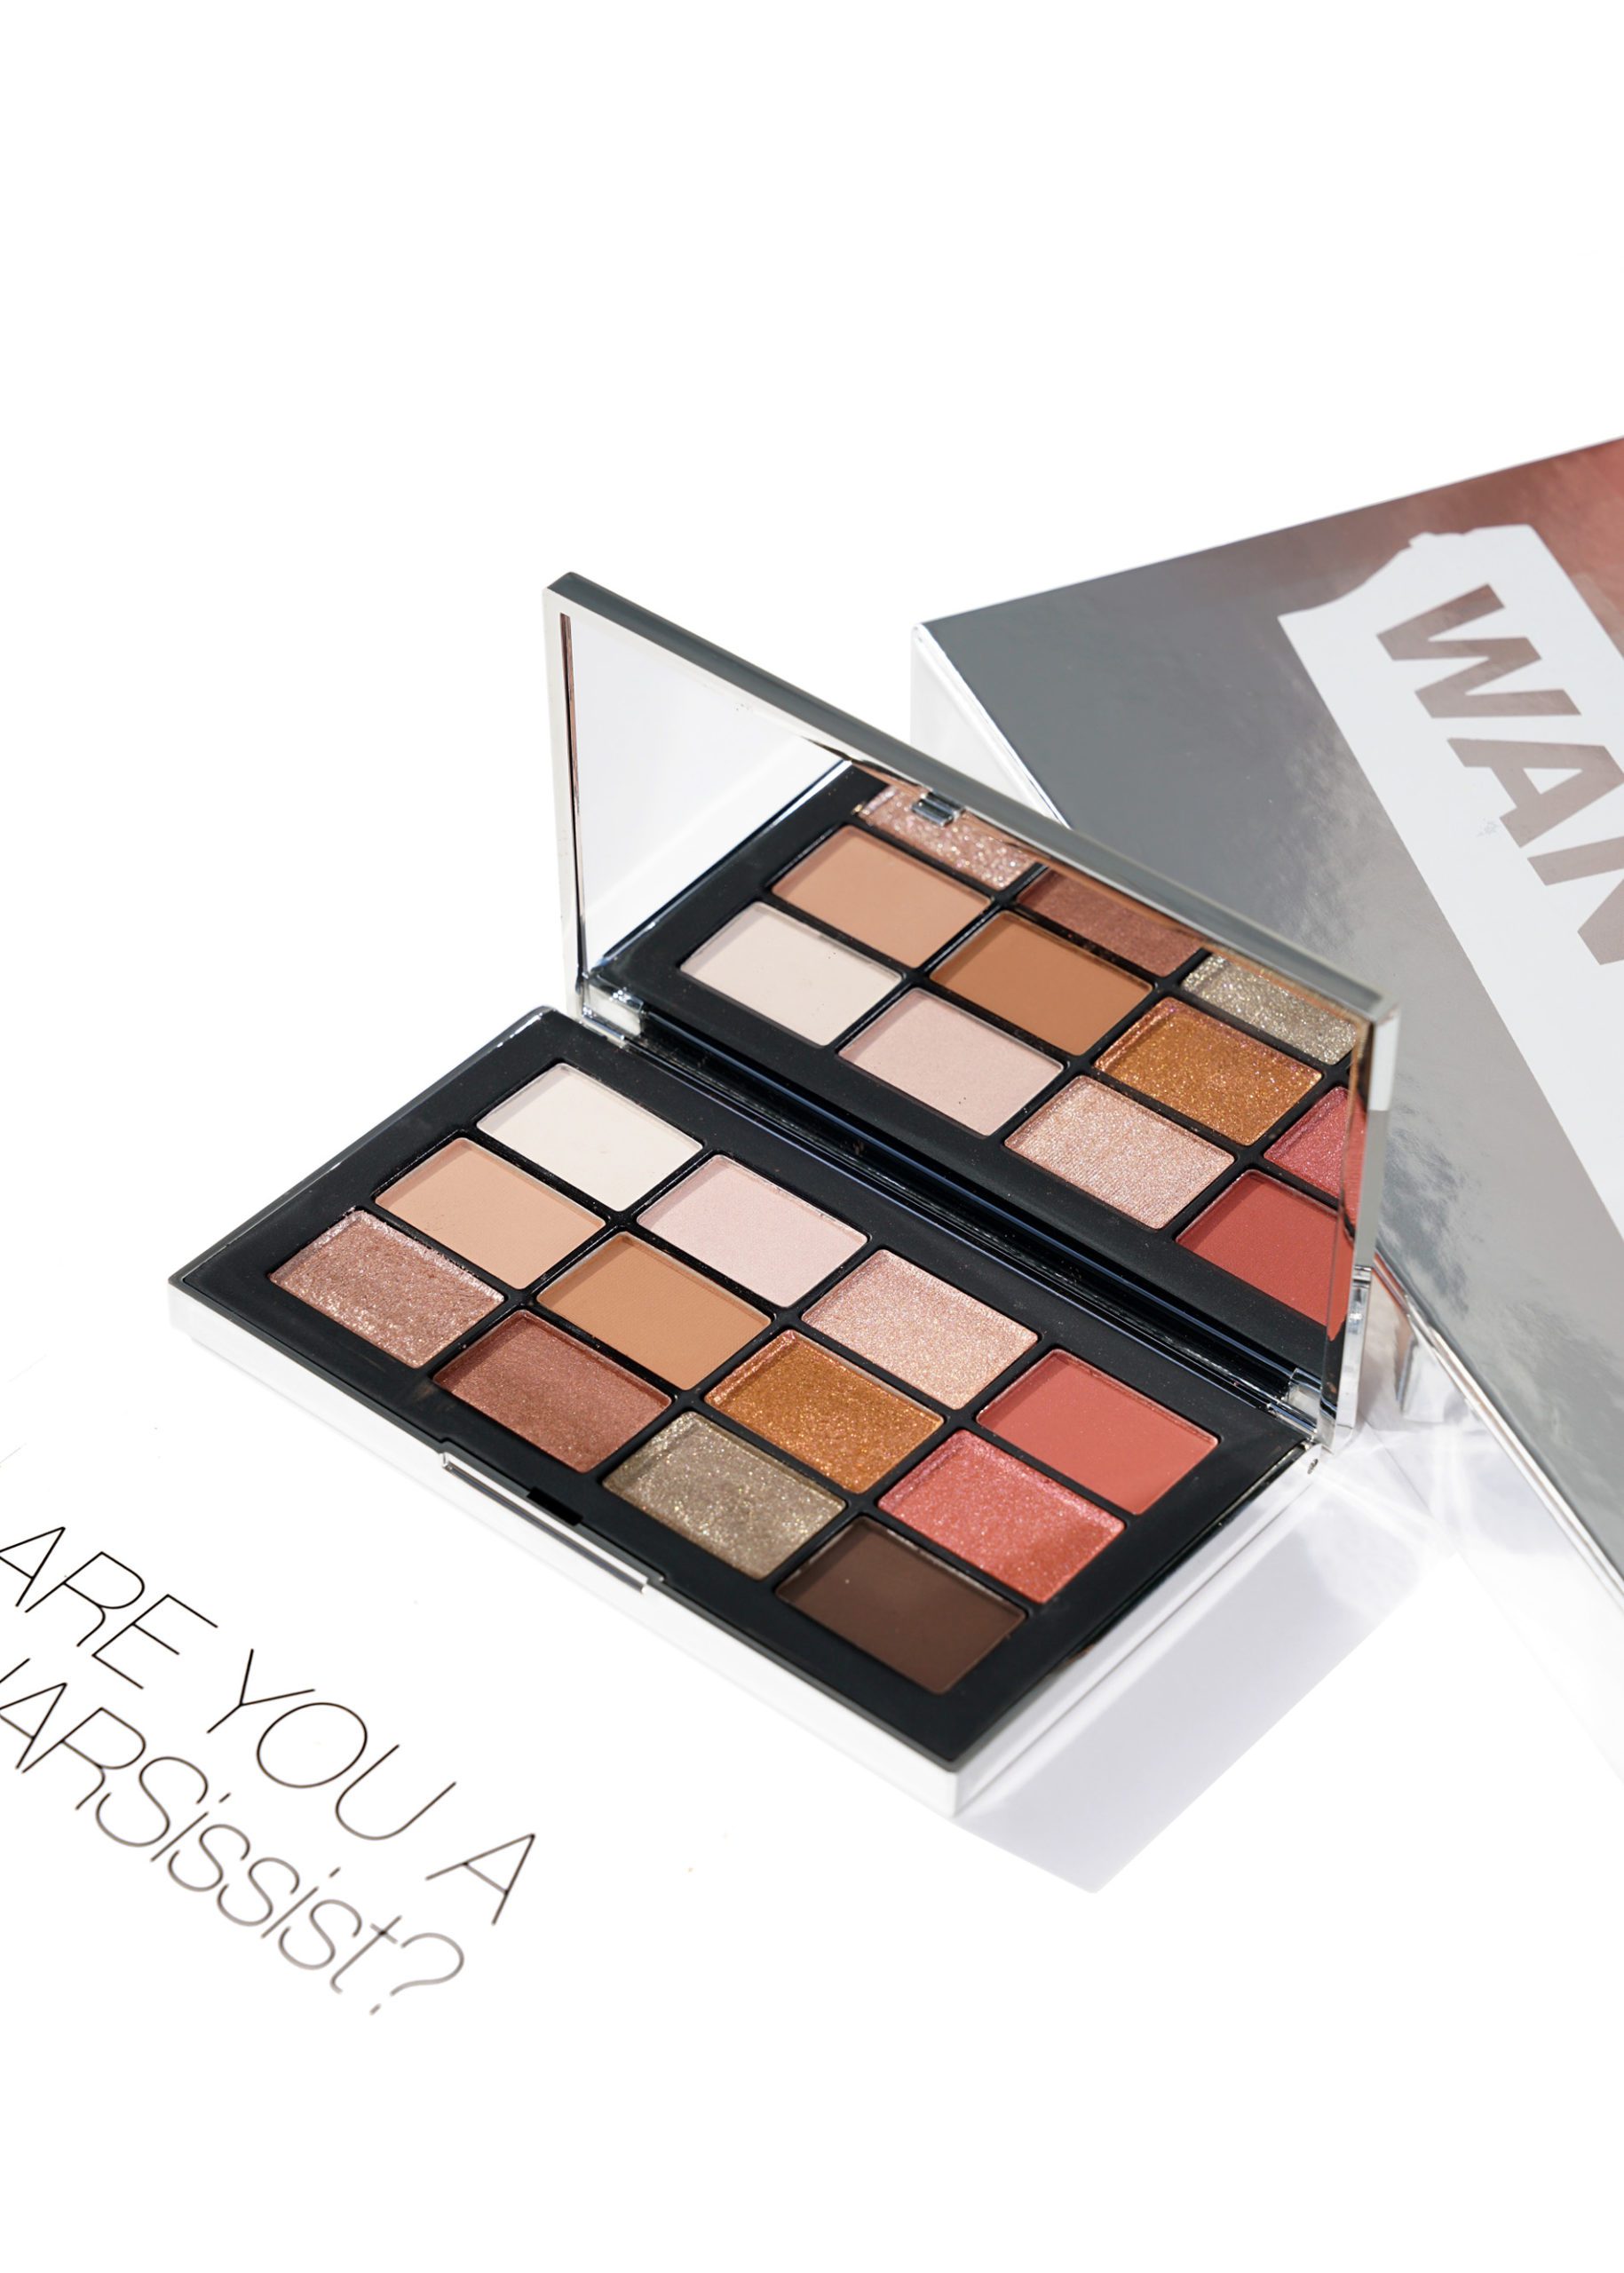 NARS Narsissist Wanted Eyeshadow Palette Review - The Beauty Look Book